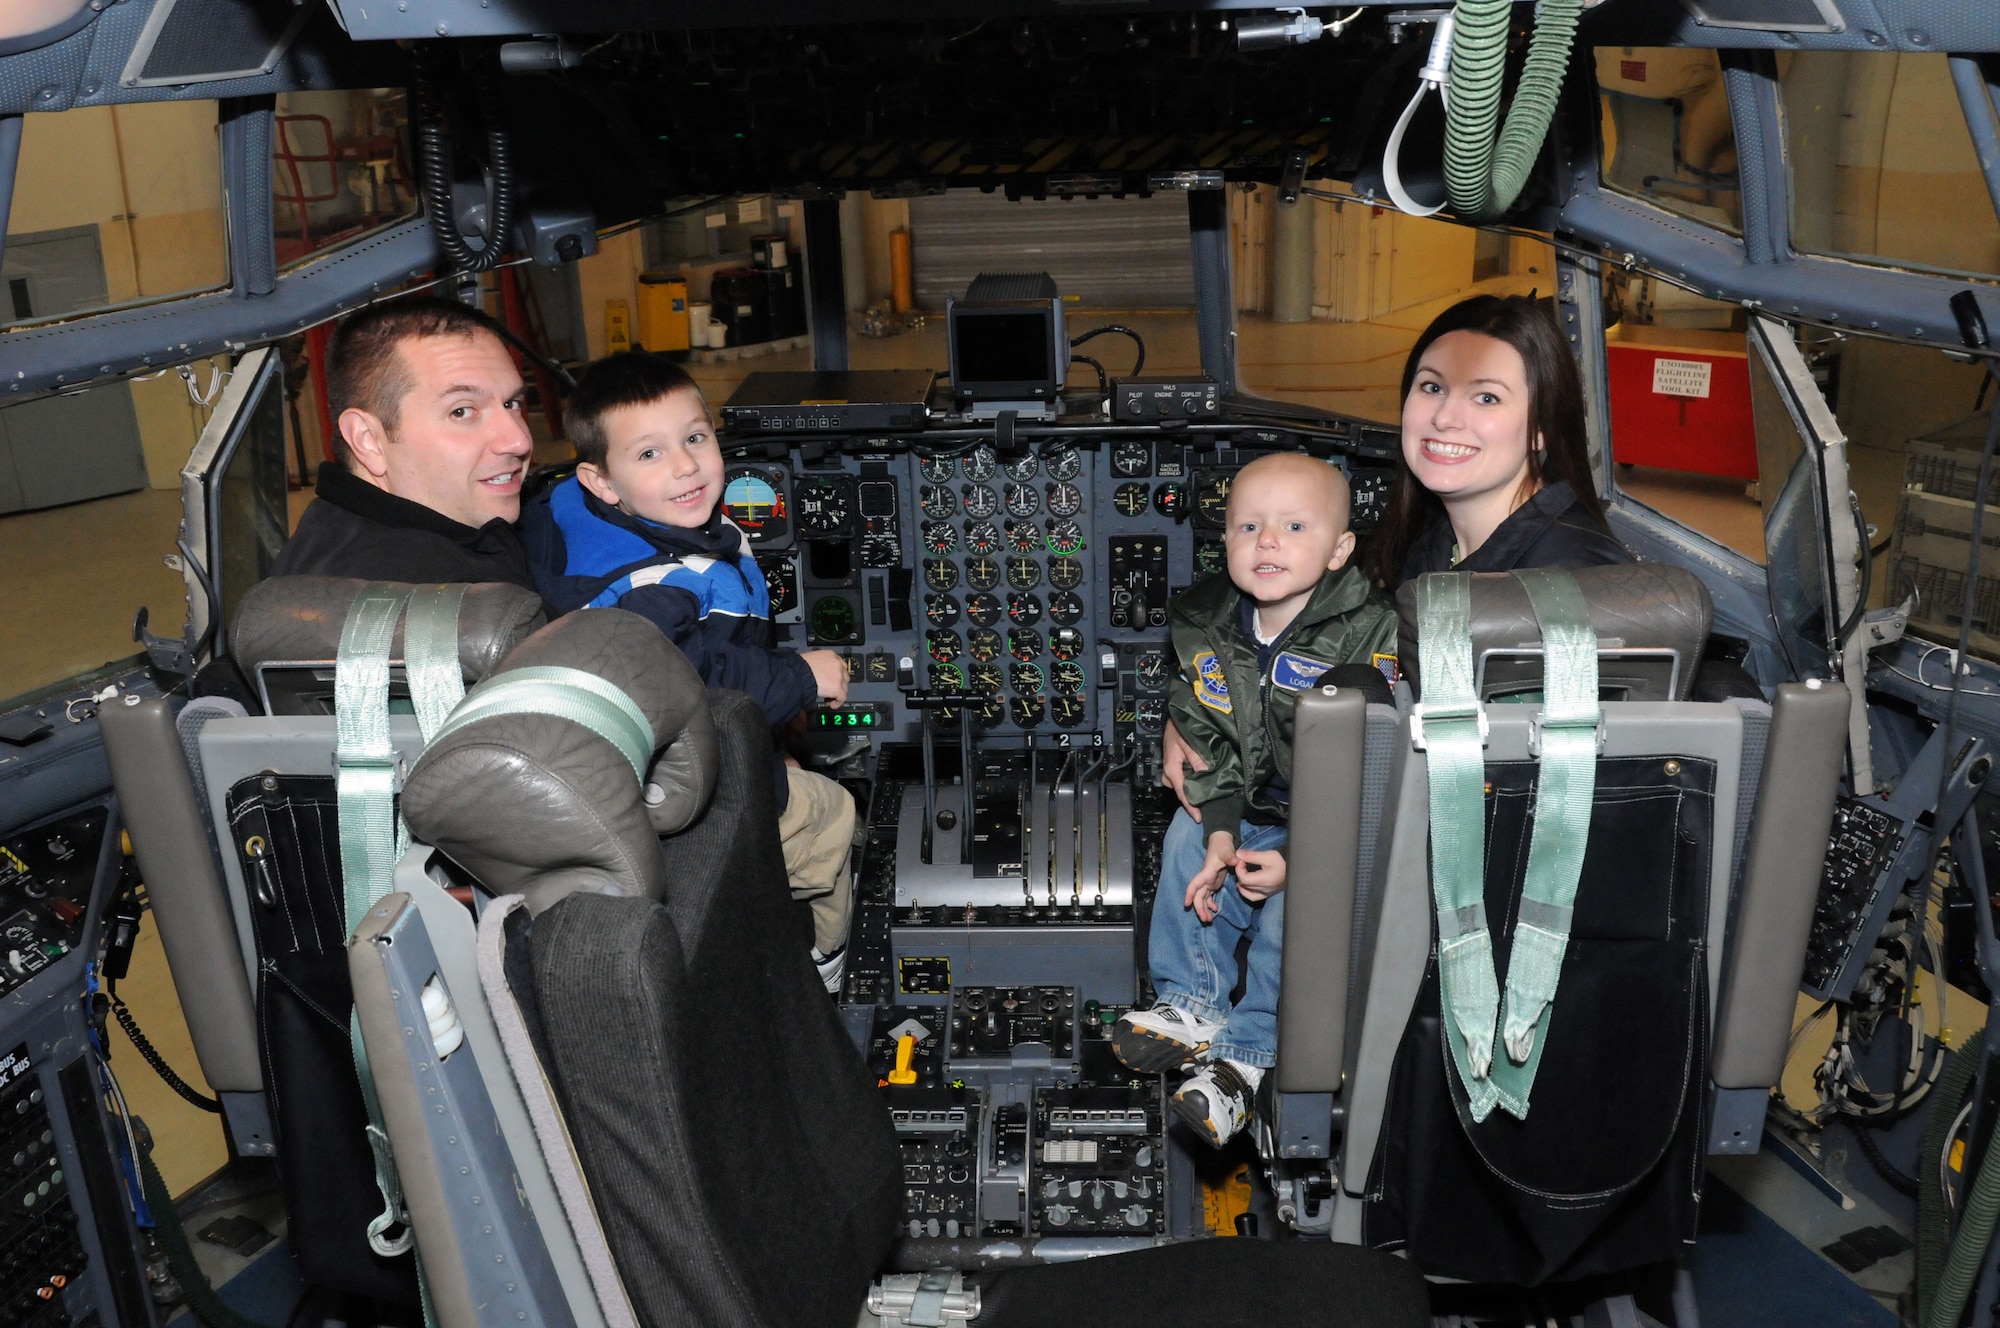 A local 3-year-old boy's dream came true when he reported to the 107th Airlift Wing for the day as an honorary pilot. Logan and his family check out all the gauges, switches and gadgets in the cockpit of a C-130. From left to right; Logan's father Marc, his brother Caiden, and his mother Carol.  (U.S. Air Force photo/Staff Sgt. Peter Dean)  